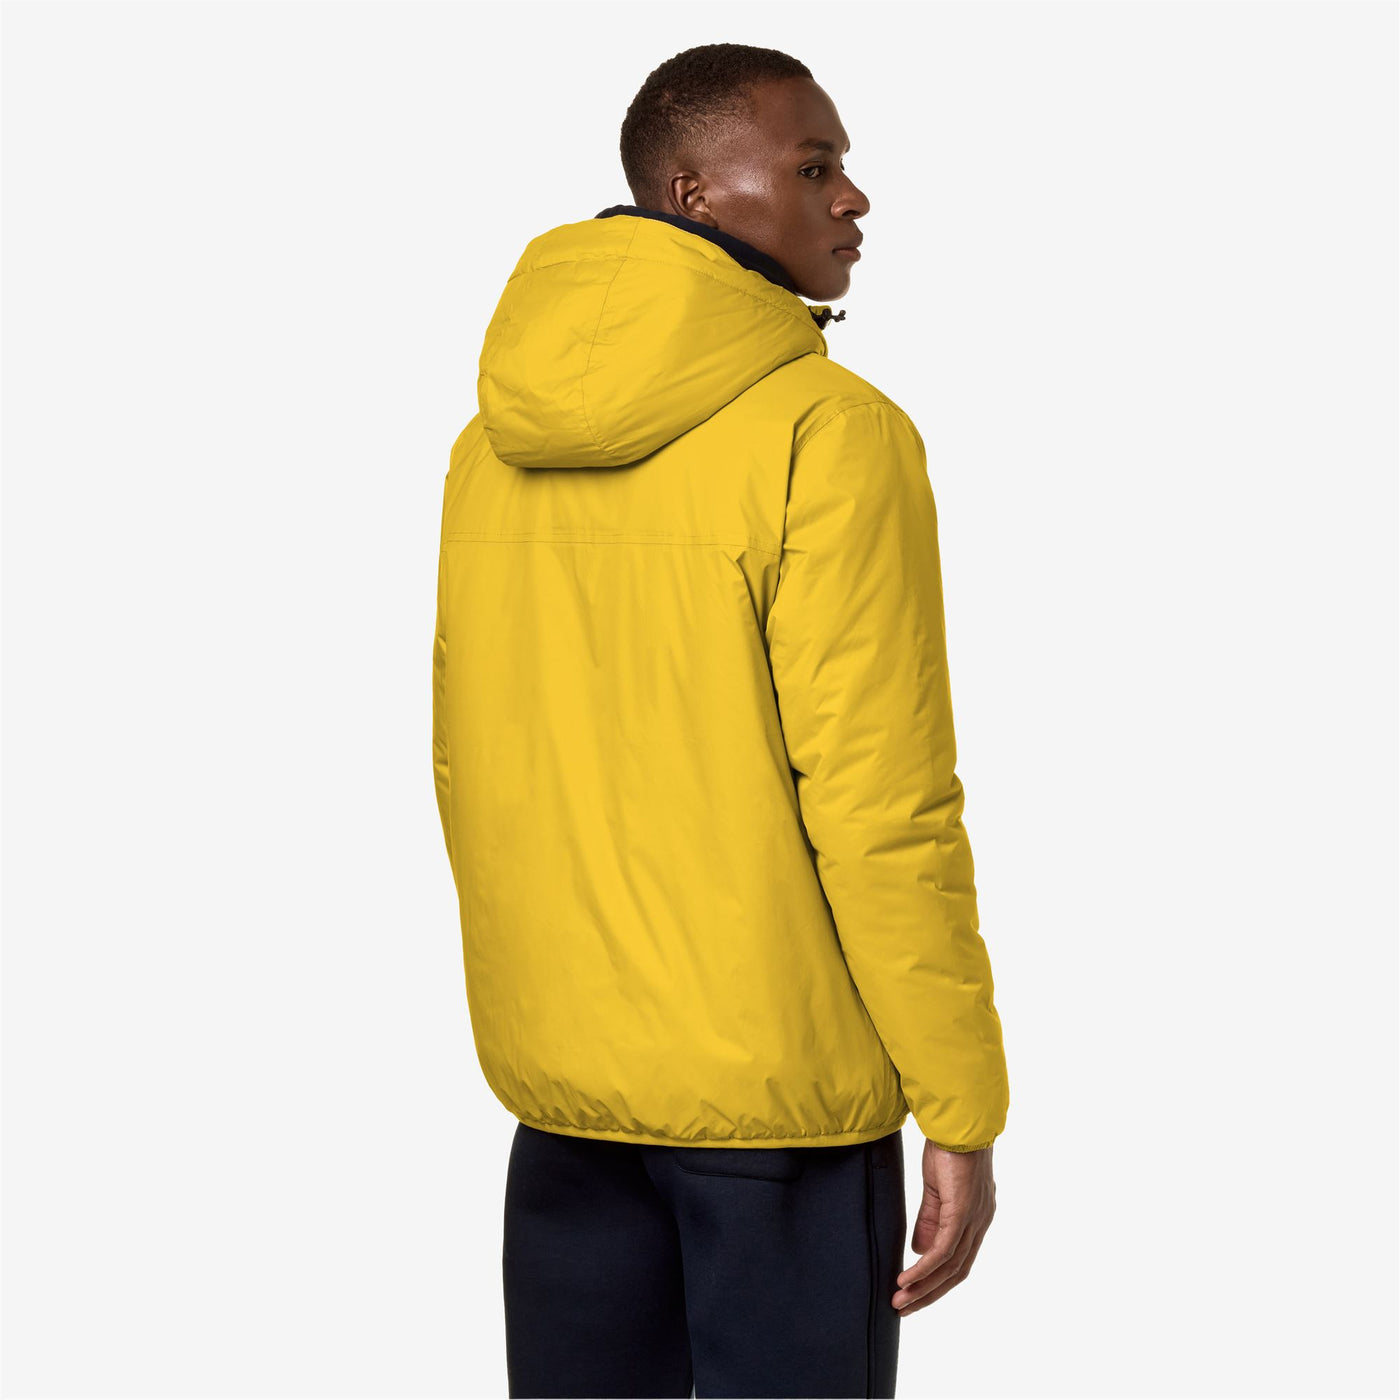 Jackets Unisex LE VRAI 3.0 CLAUDE ORSETTO Mid YELLOW ZAFFERANO Dressed Front Double		